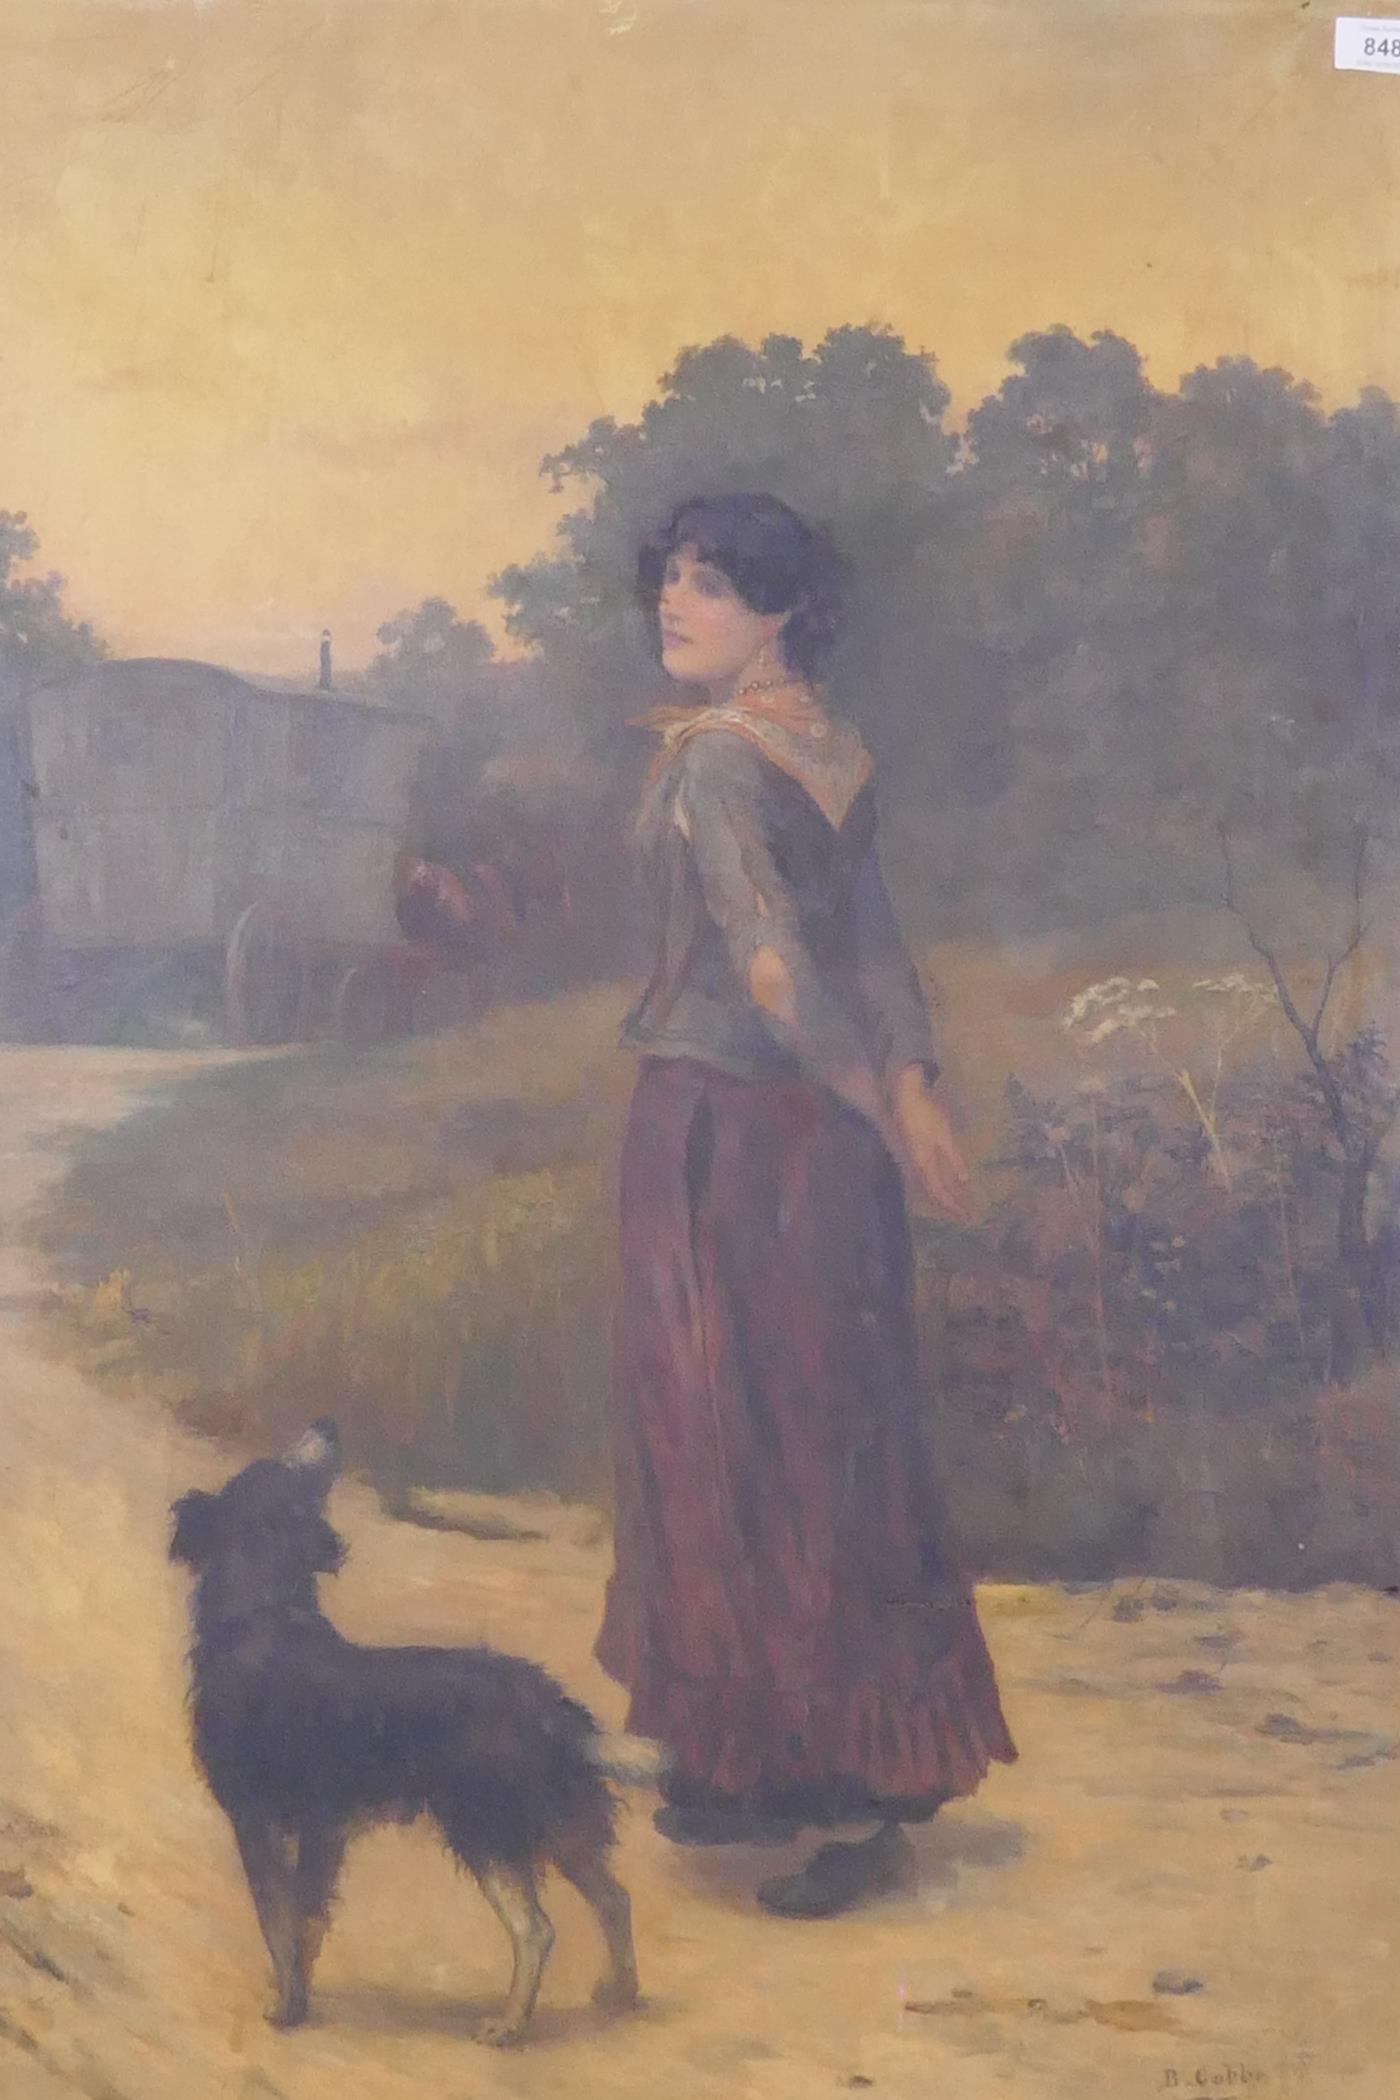 B. Cobbe, gypsy girl and dog on a path with caravan beyond, early C20th, signed, oil on canvas, re-